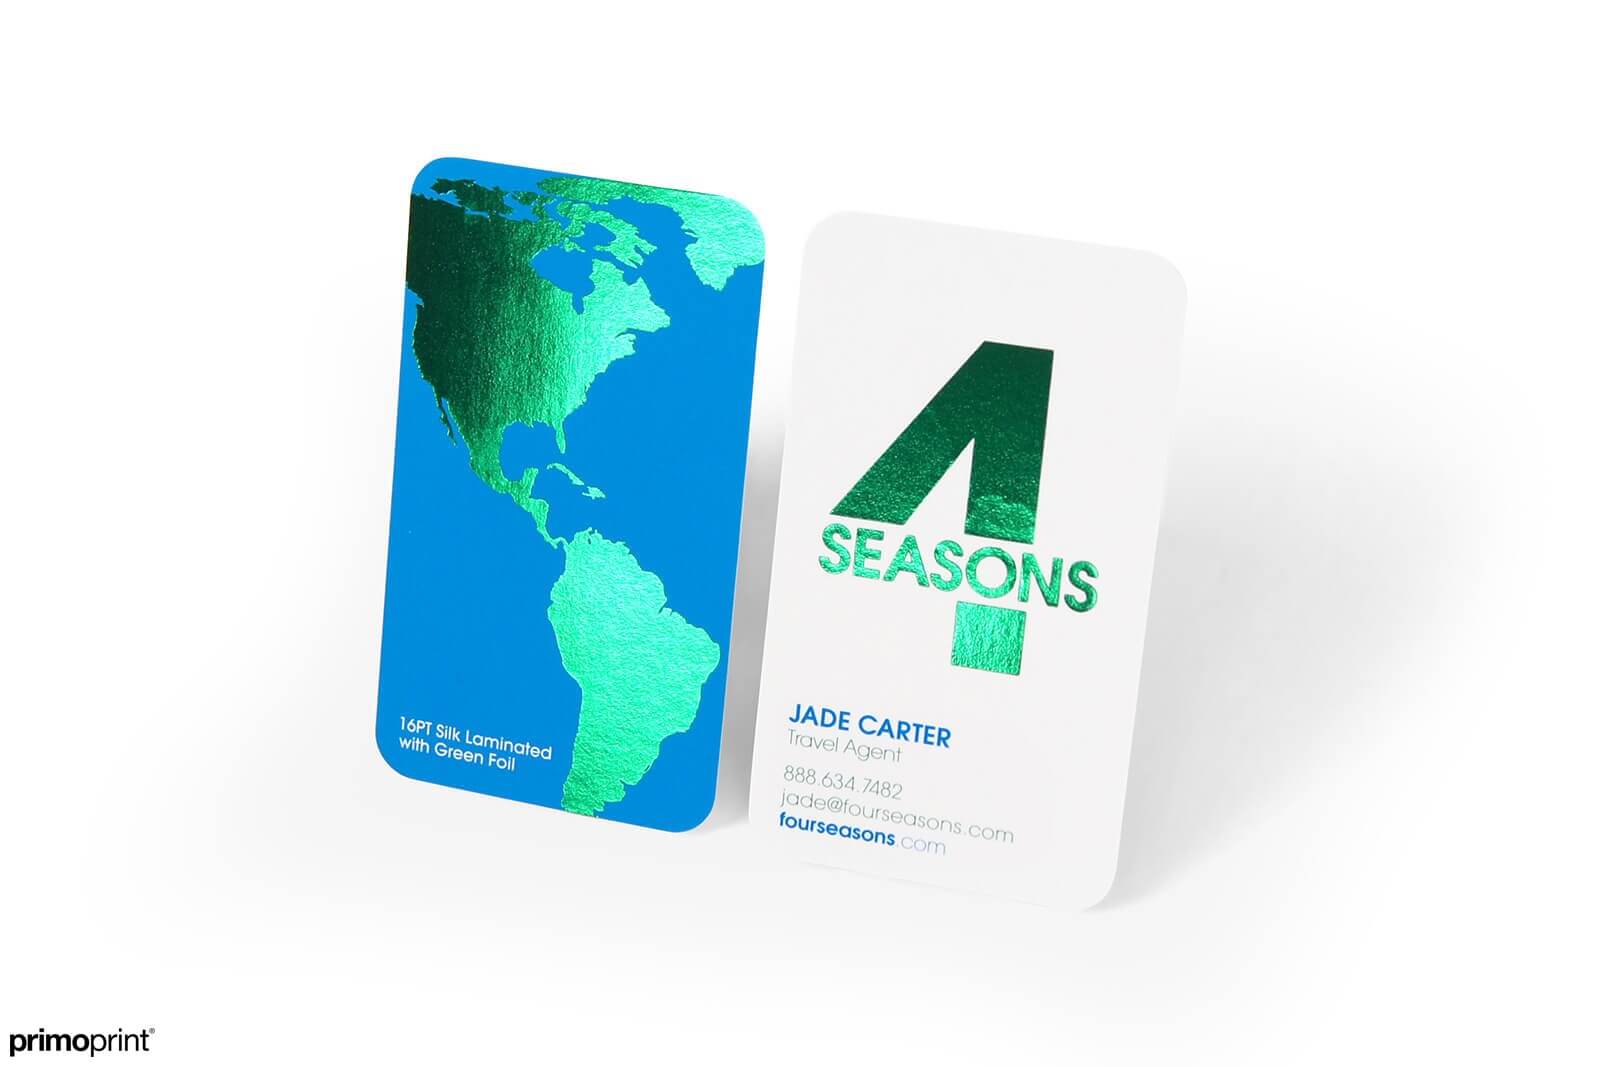 Premium, 19pt Silk business card with green Stamped Foil and 1/4 rounded corners.